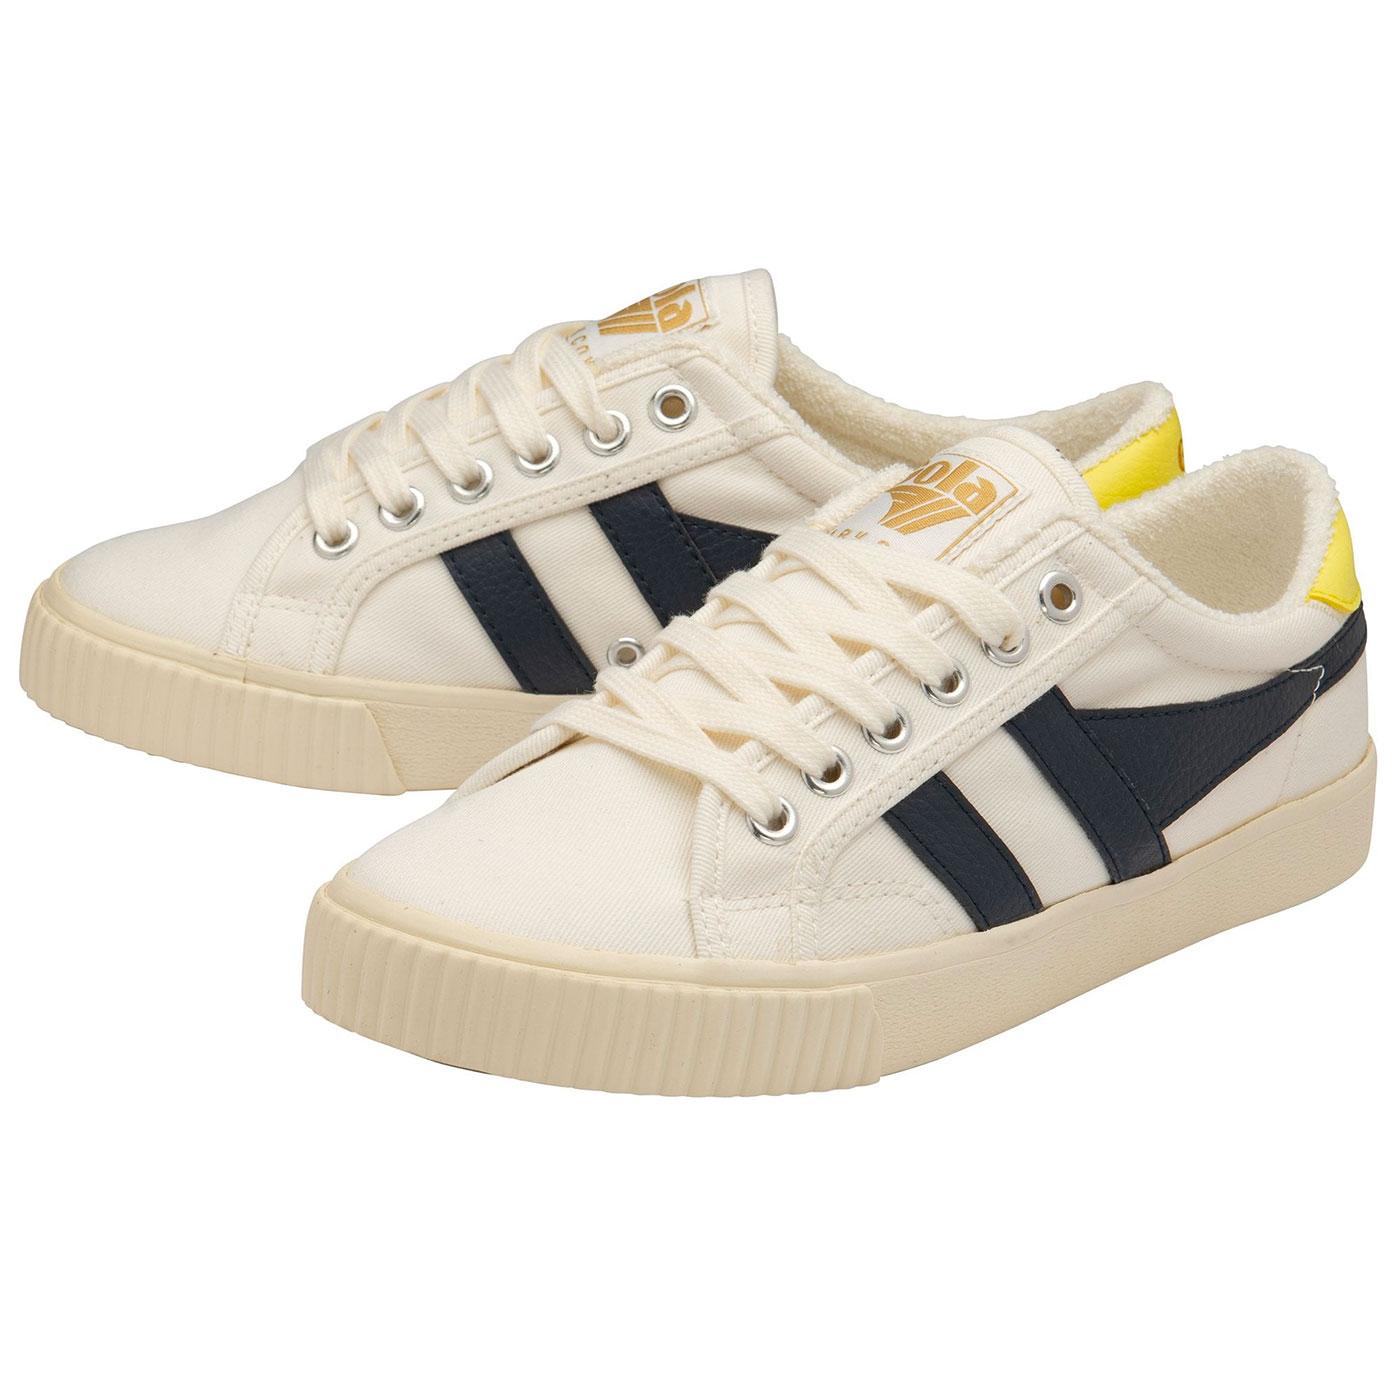 GOLA Mark Cox Womens Tennis Trainers in Off White/Navy/Lime